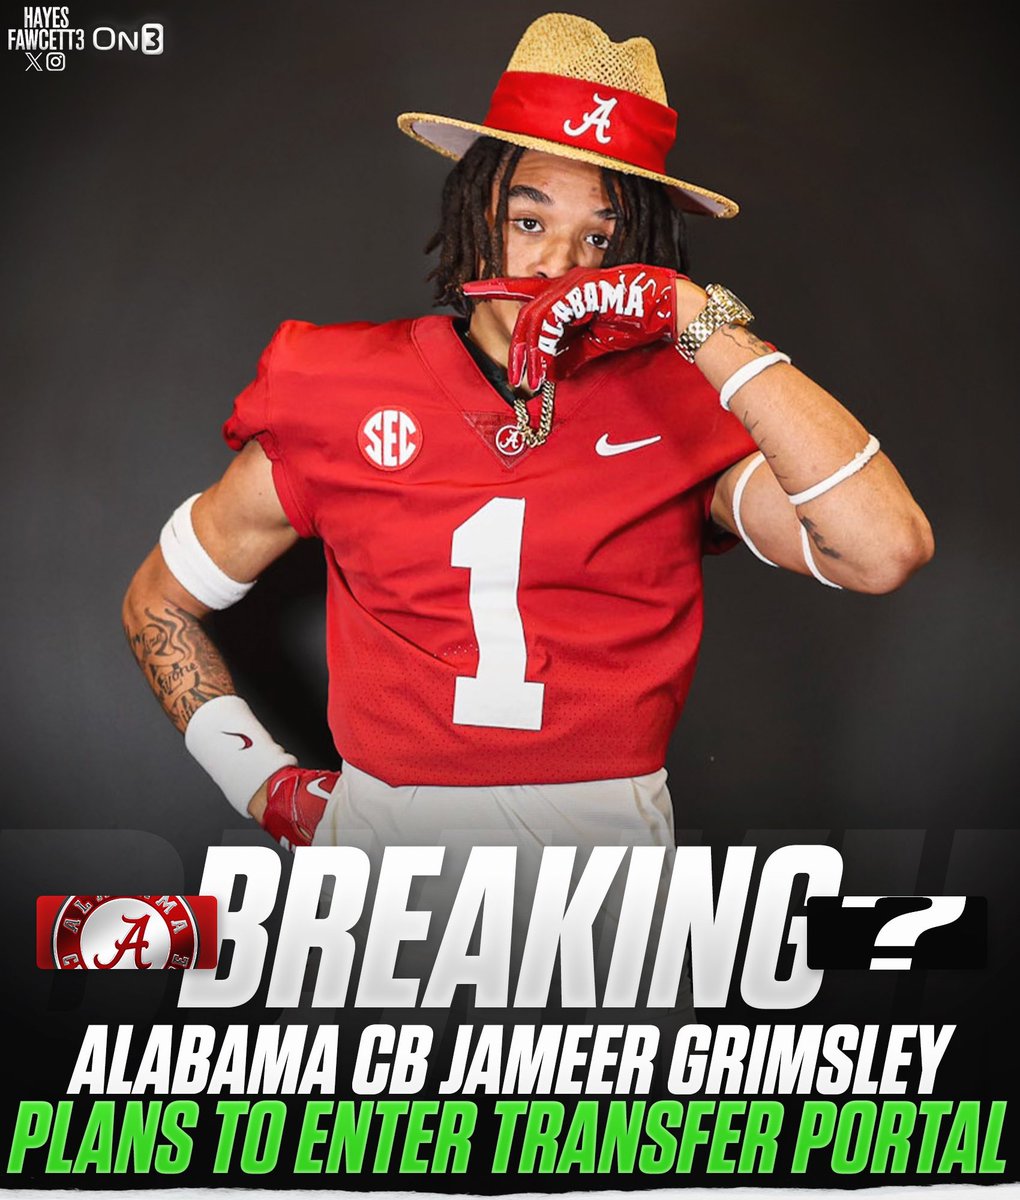 BREAKING: Alabama Signee Jameer Grimsley plans to enter the Transfer Portal, he tells @on3sports The 6’2 185 CB signed with the Crimson Tide in December Will have 4 years of eligibility remaining on3.com/db/jameer-grim…